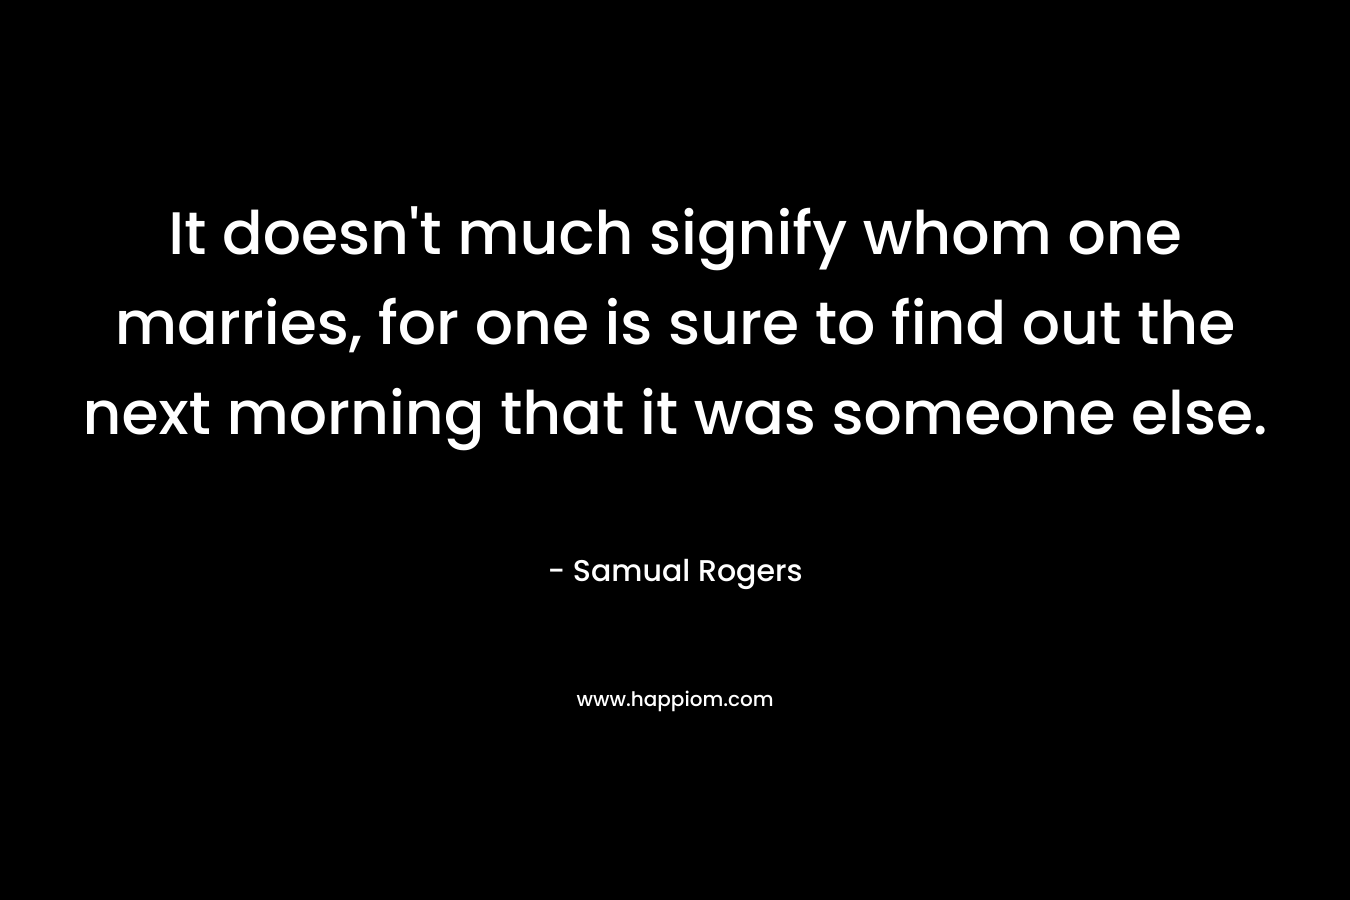 It doesn’t much signify whom one marries, for one is sure to find out the next morning that it was someone else. – Samual Rogers